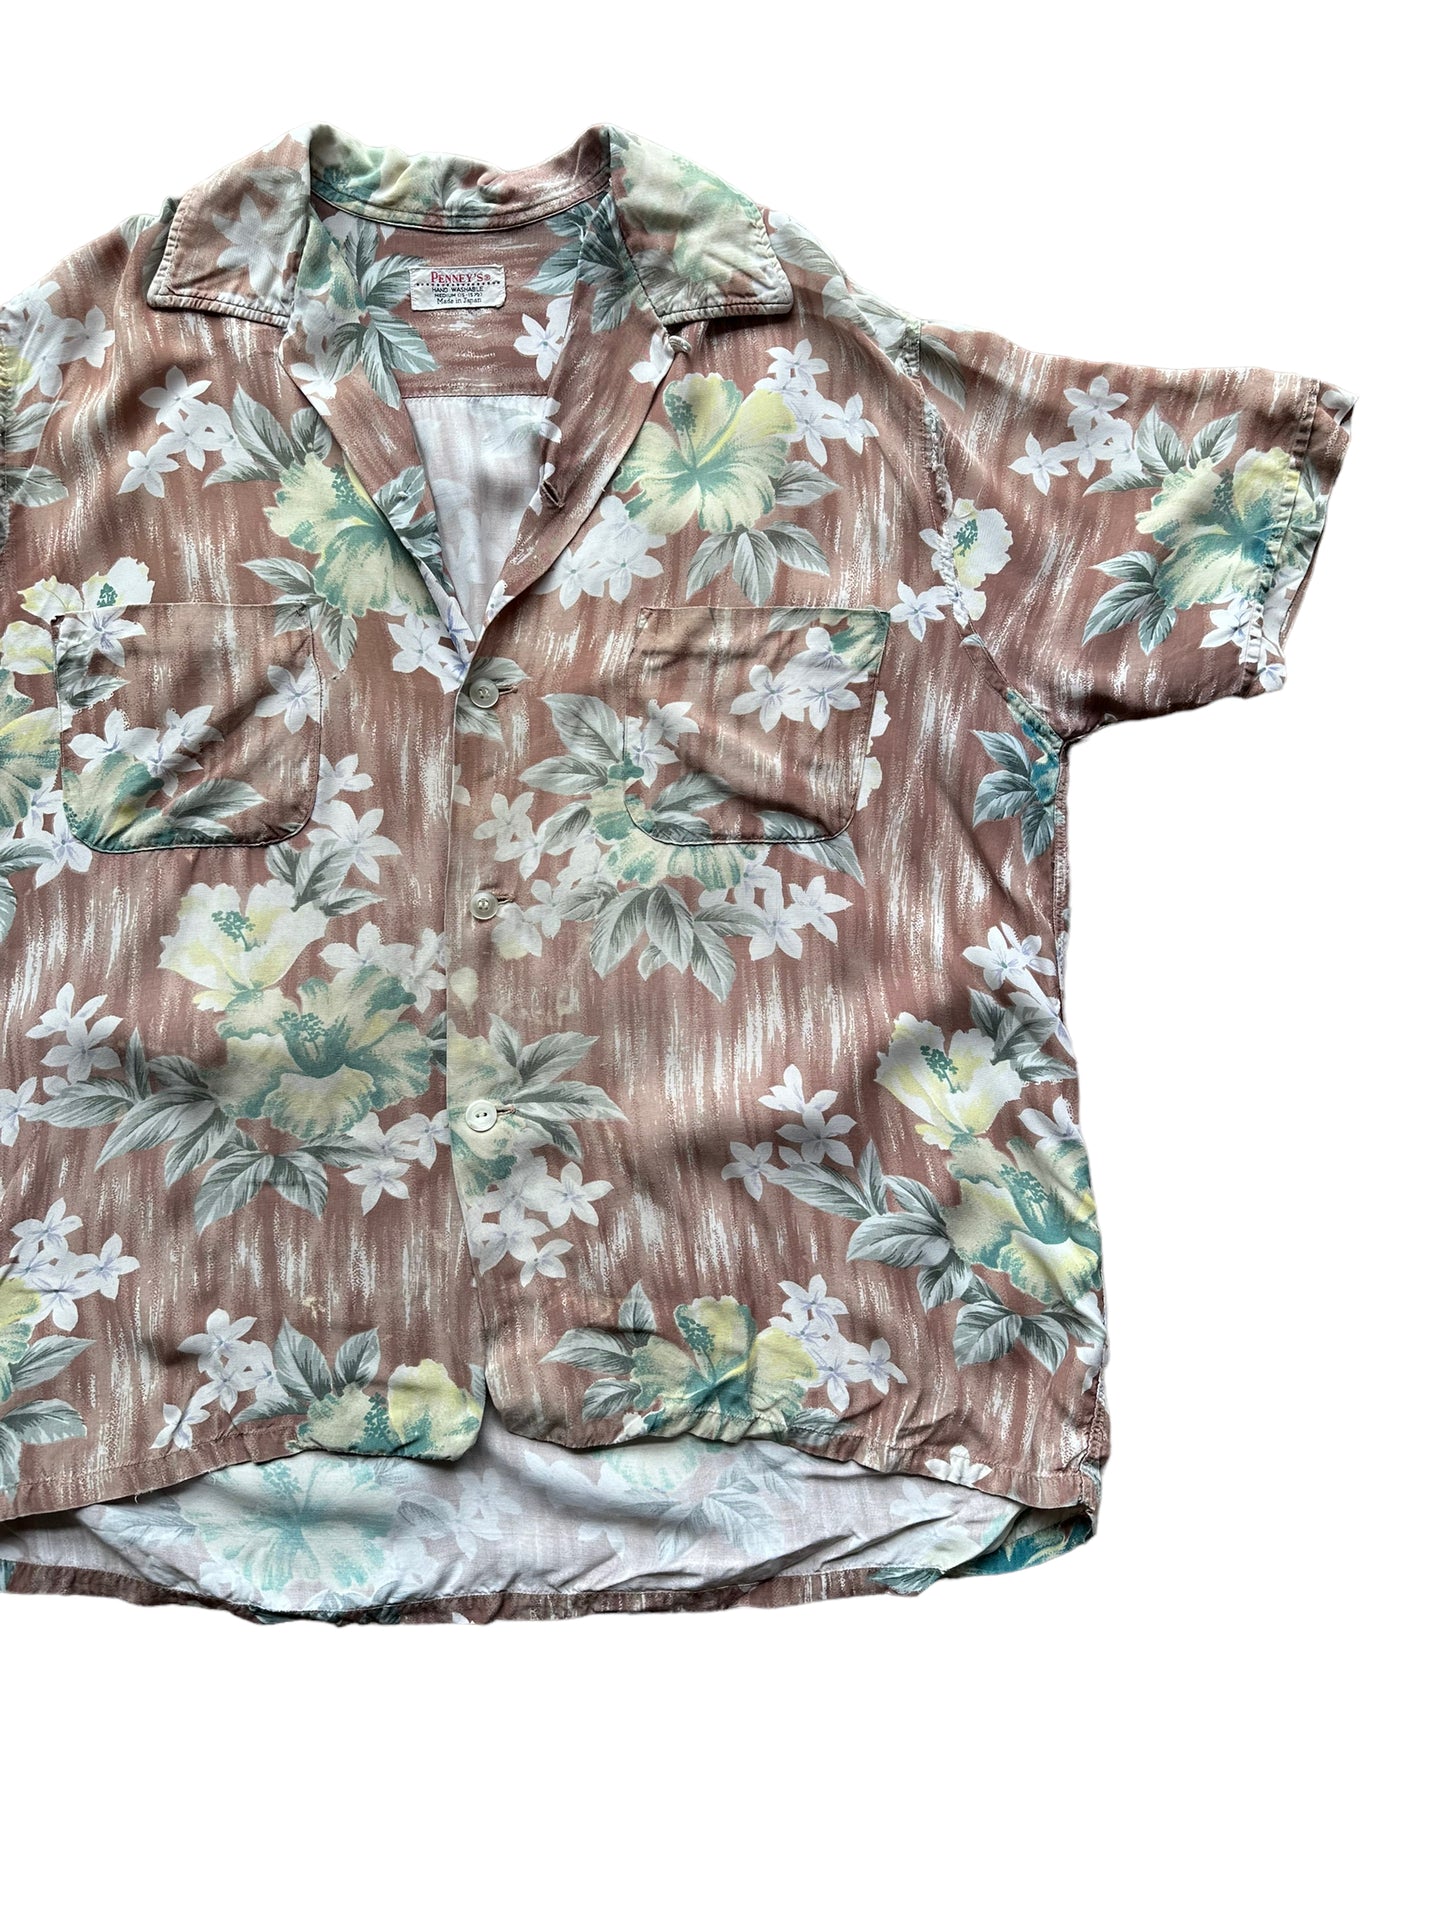 Front left shot of Vintage Made in Japan Penney's Brown/Green Floral Aloha Shirt SZ M | Seattle Vintage Rayon Hawaiian Shirt | Barn Owl Vintage Clothing Seattle